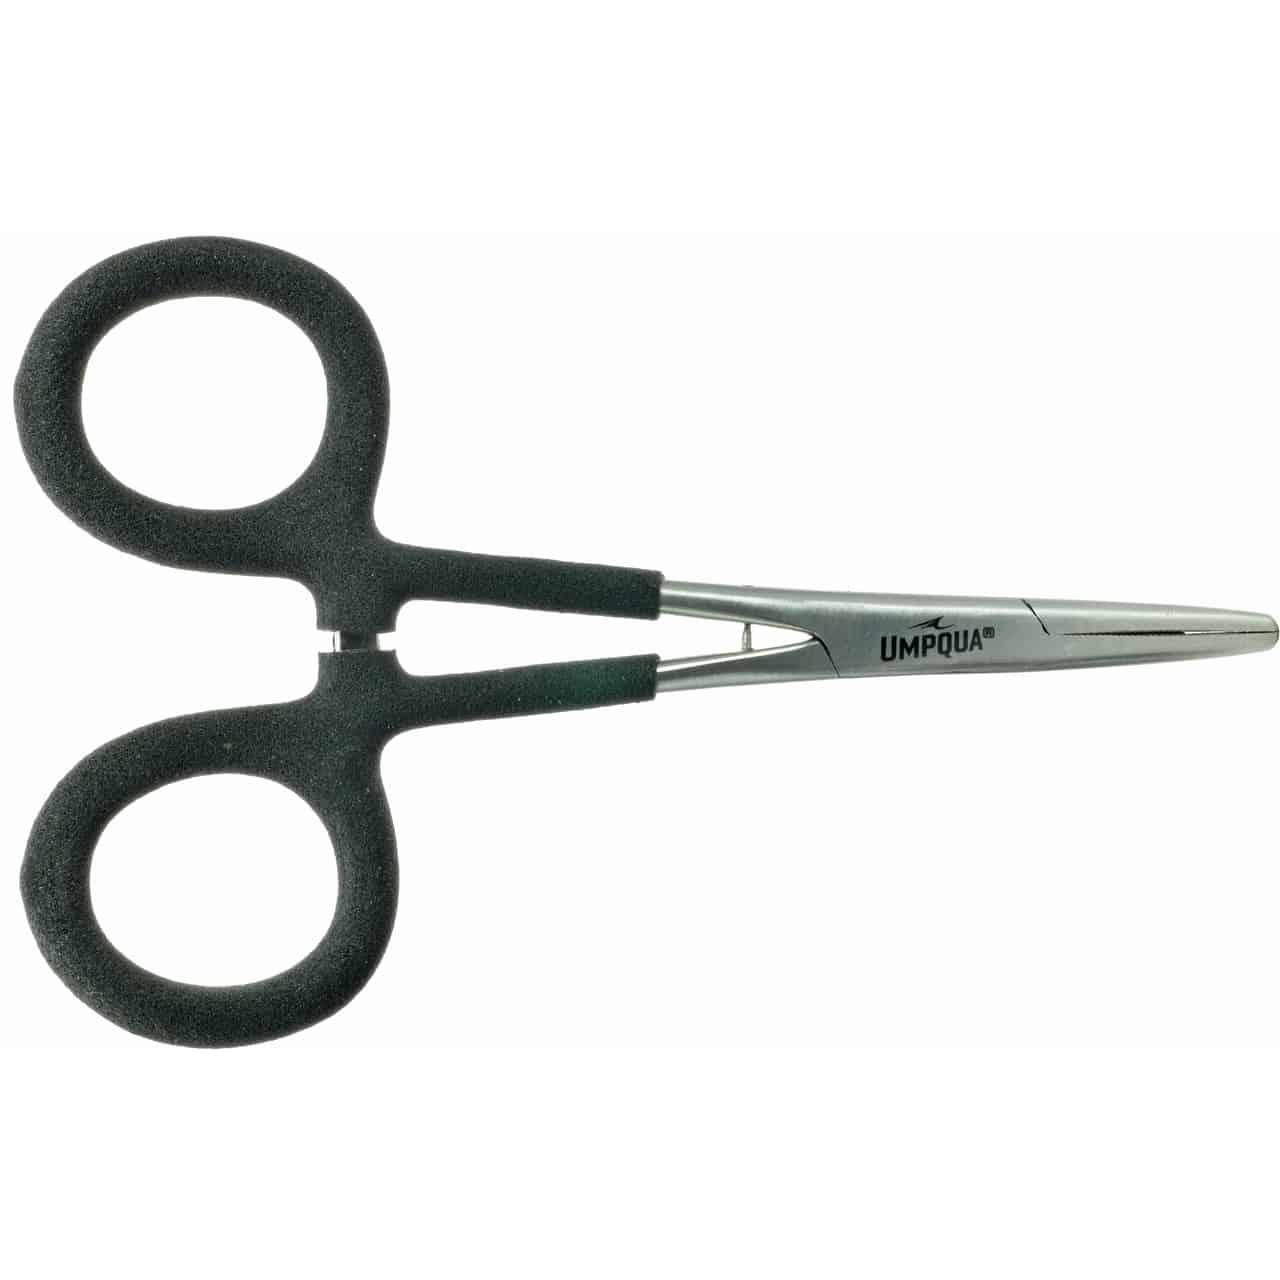 Myco 795S 35 Straight Locking Fishing Hemostat ** Check out the